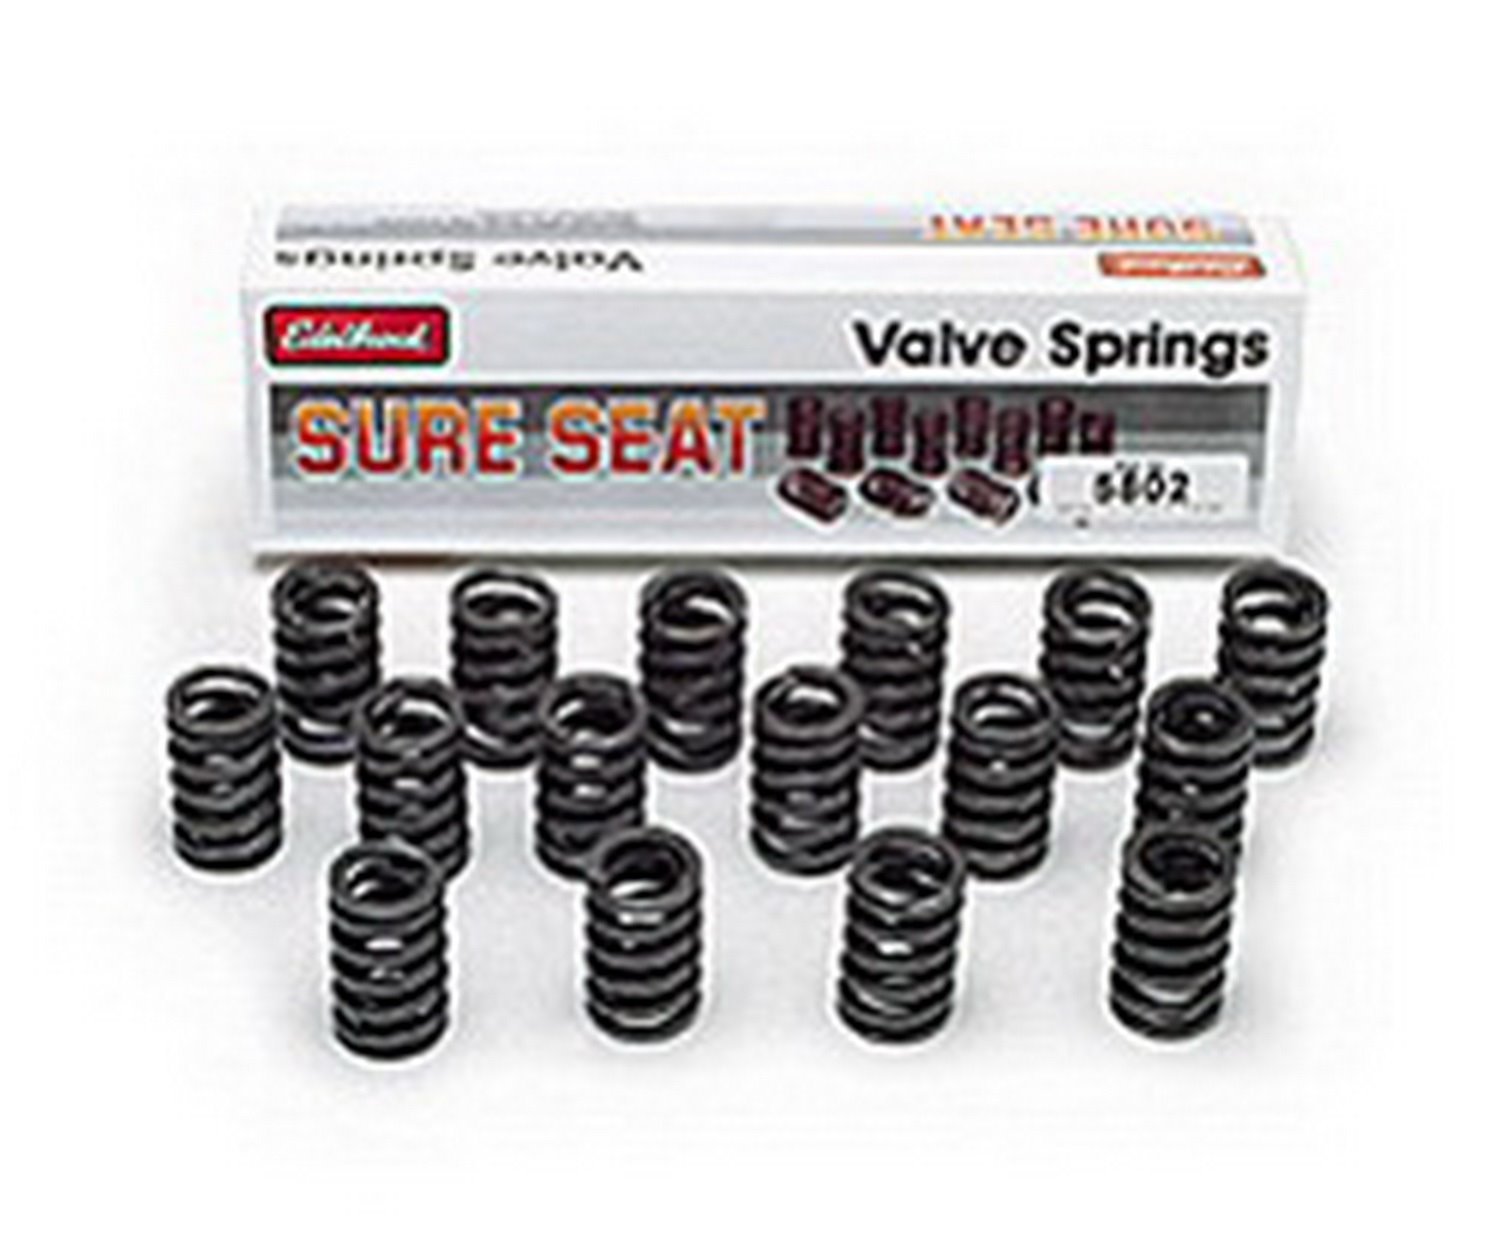 Sure Seat Replacement Valve Springs for Edelbrock Aluminum Heads